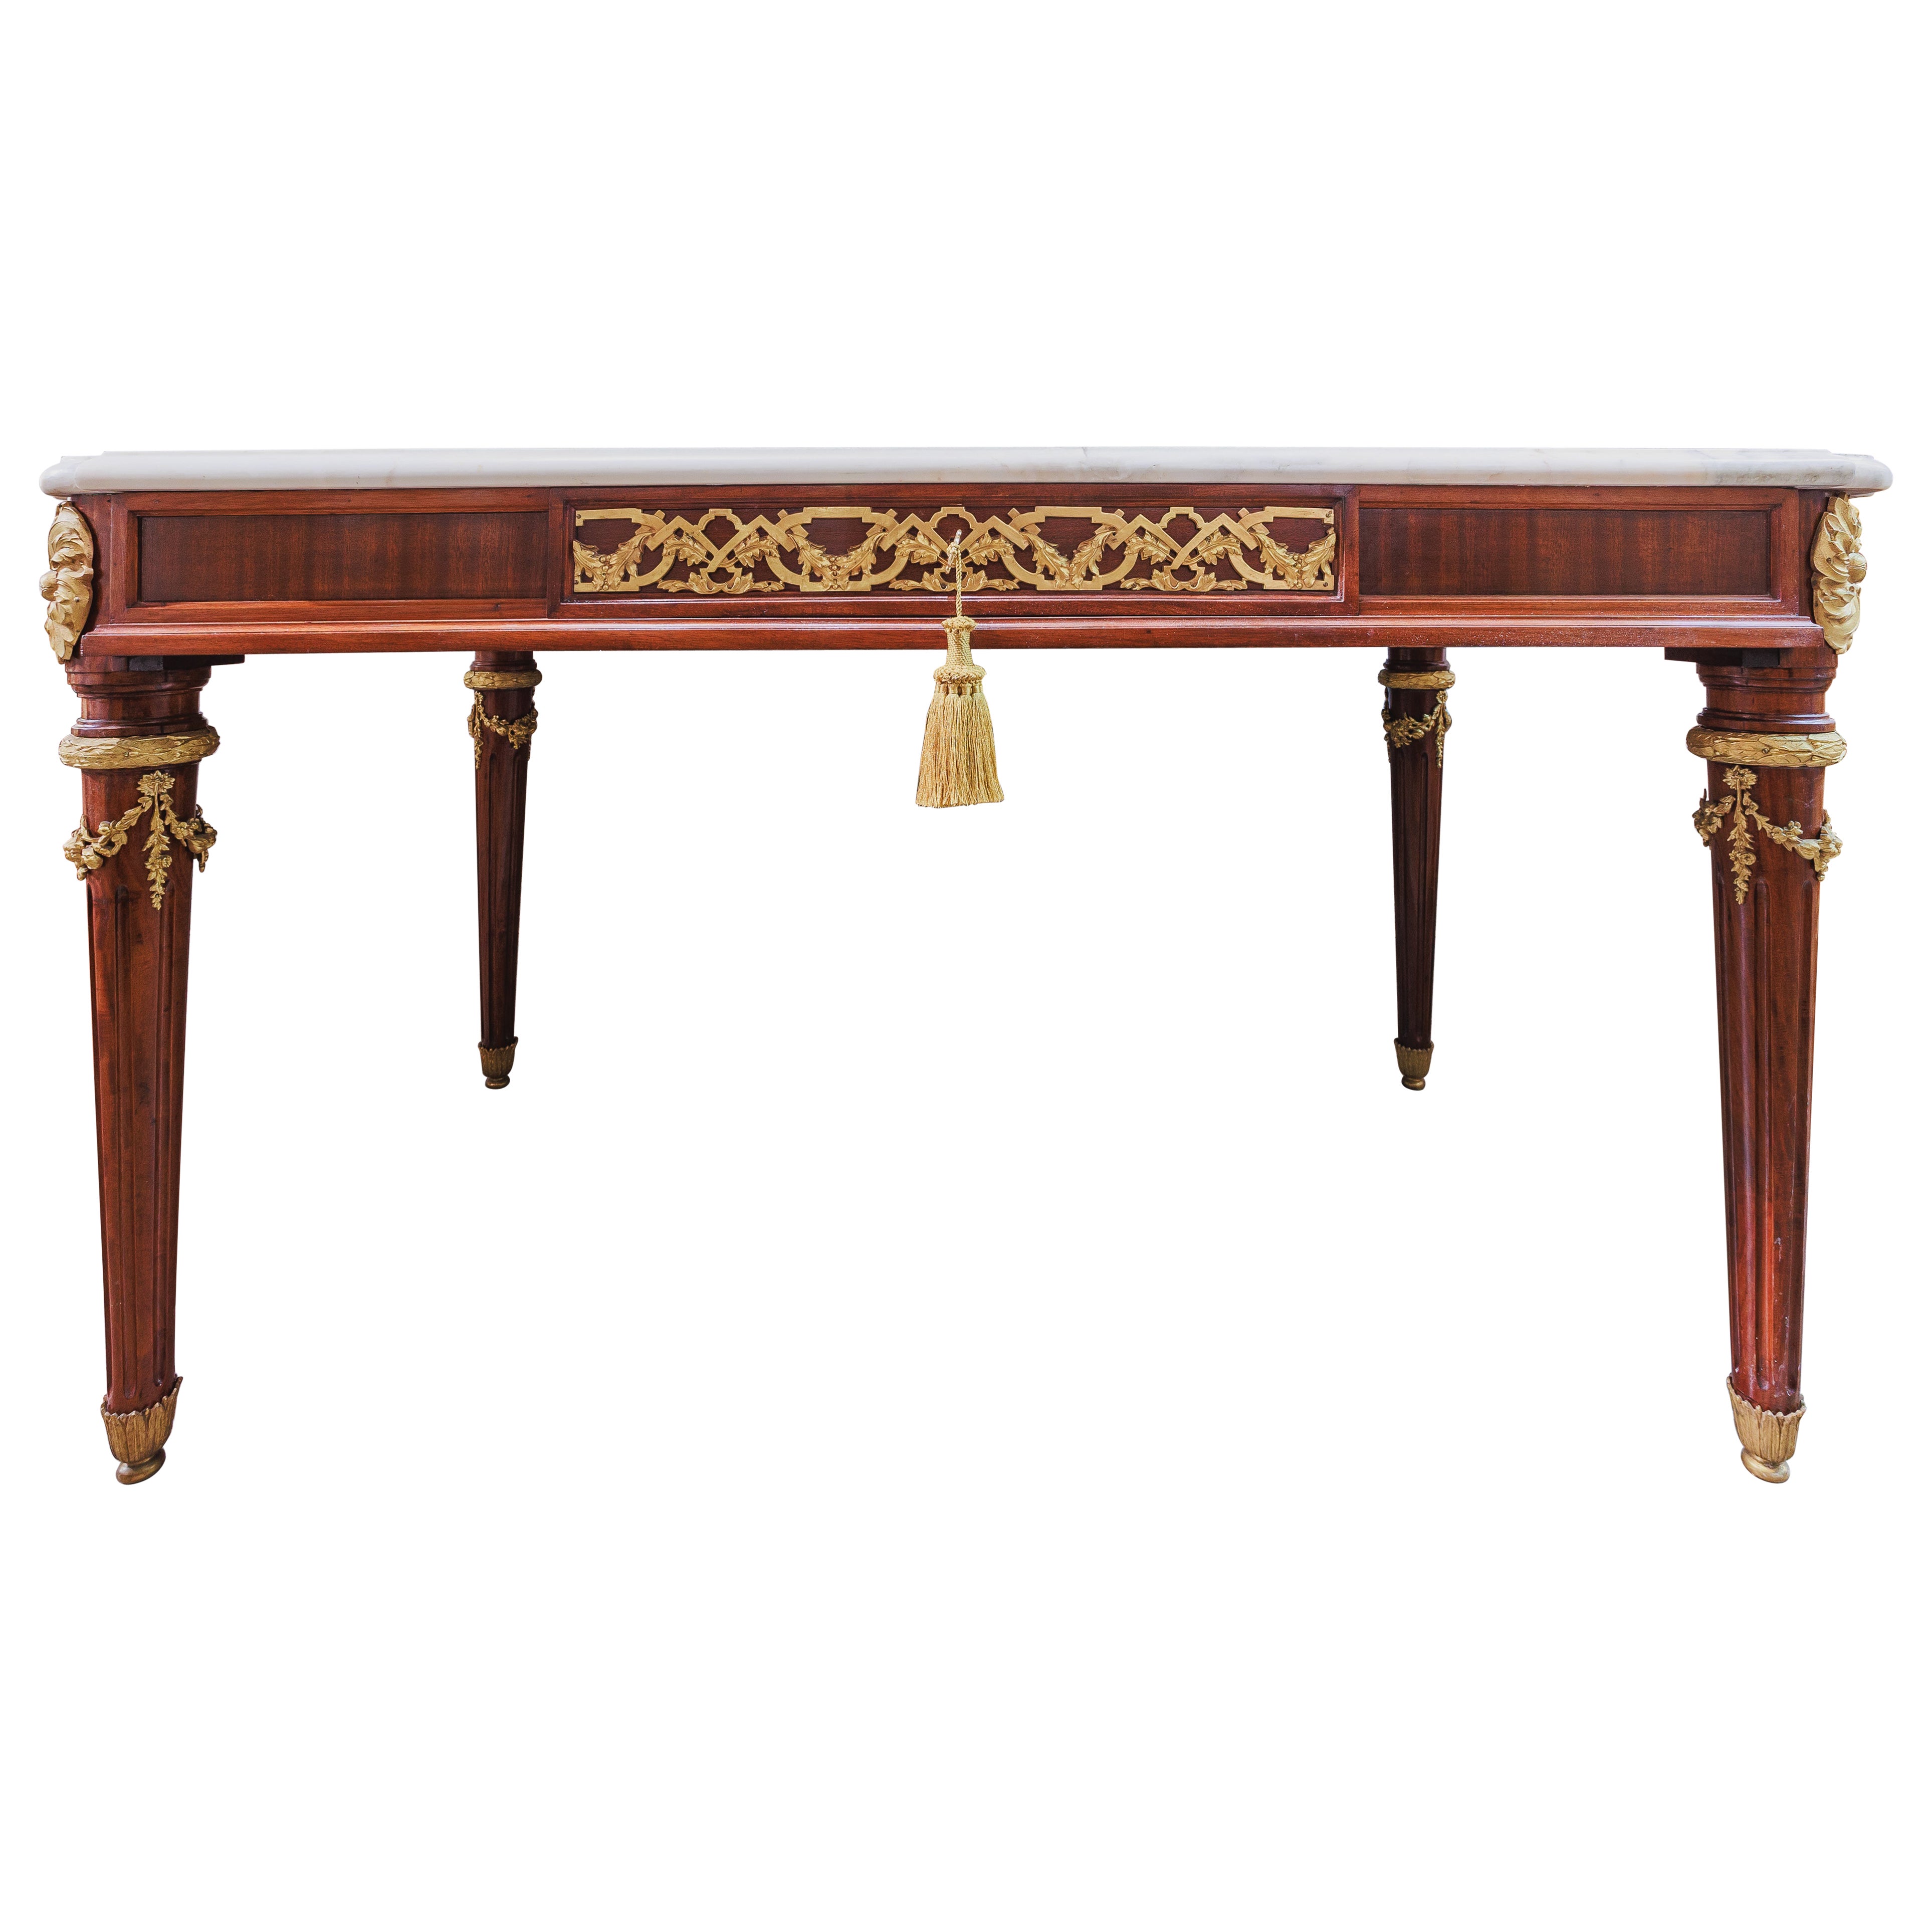 A fine 19th c French Louis XVI mahogany & gilt bronze mounted center hall table